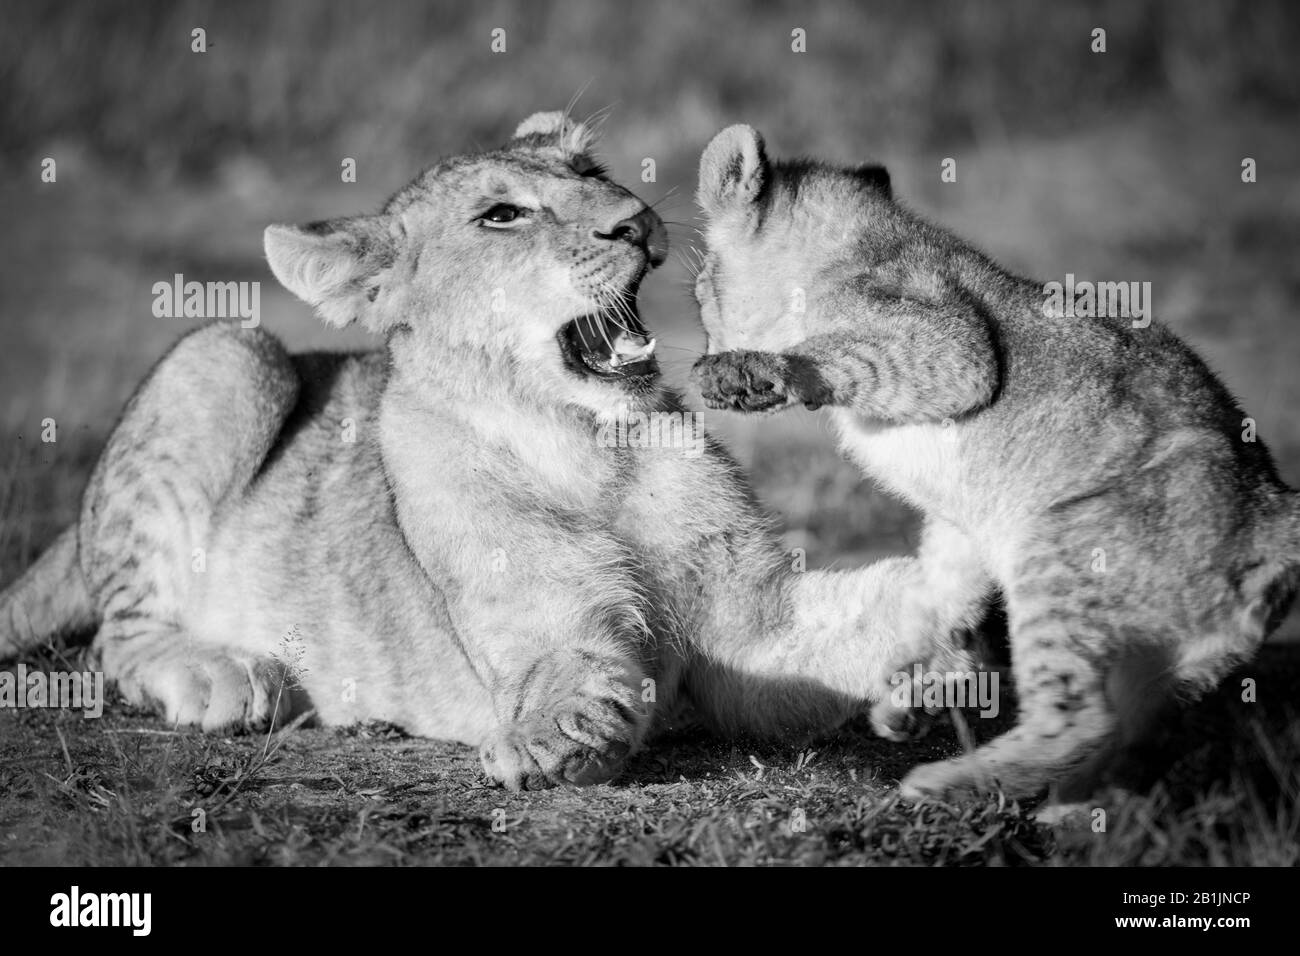 Two lion cubs play fight in the grass with one about the slap the other with its paw and the other opening its mouth. They have golden coats that look Stock Photo